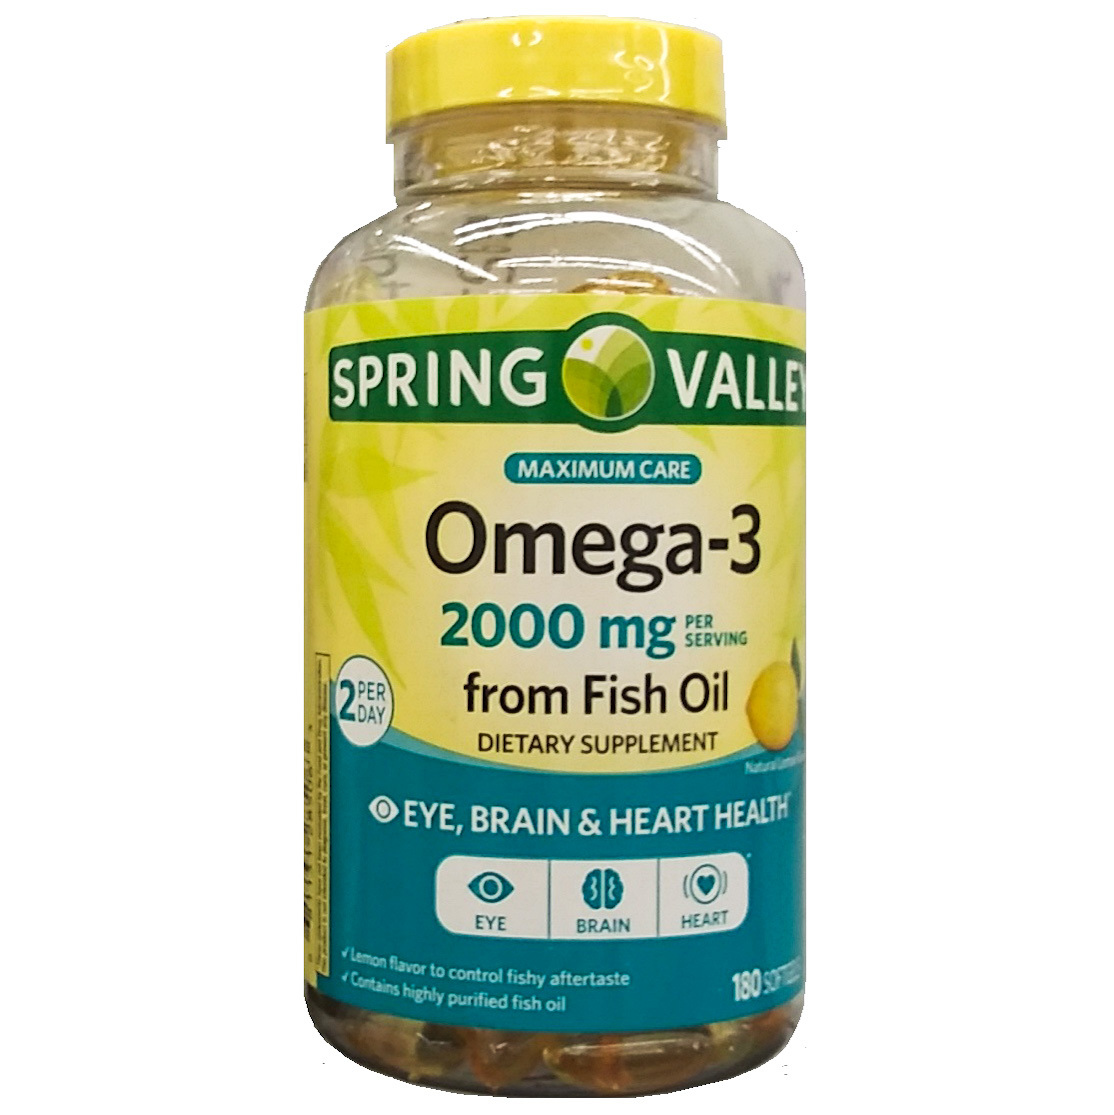 Spring Valley Omega-3 from Fish Oil 2000mg Eye/Brain & Heart Health 180 Softgels - $45.89